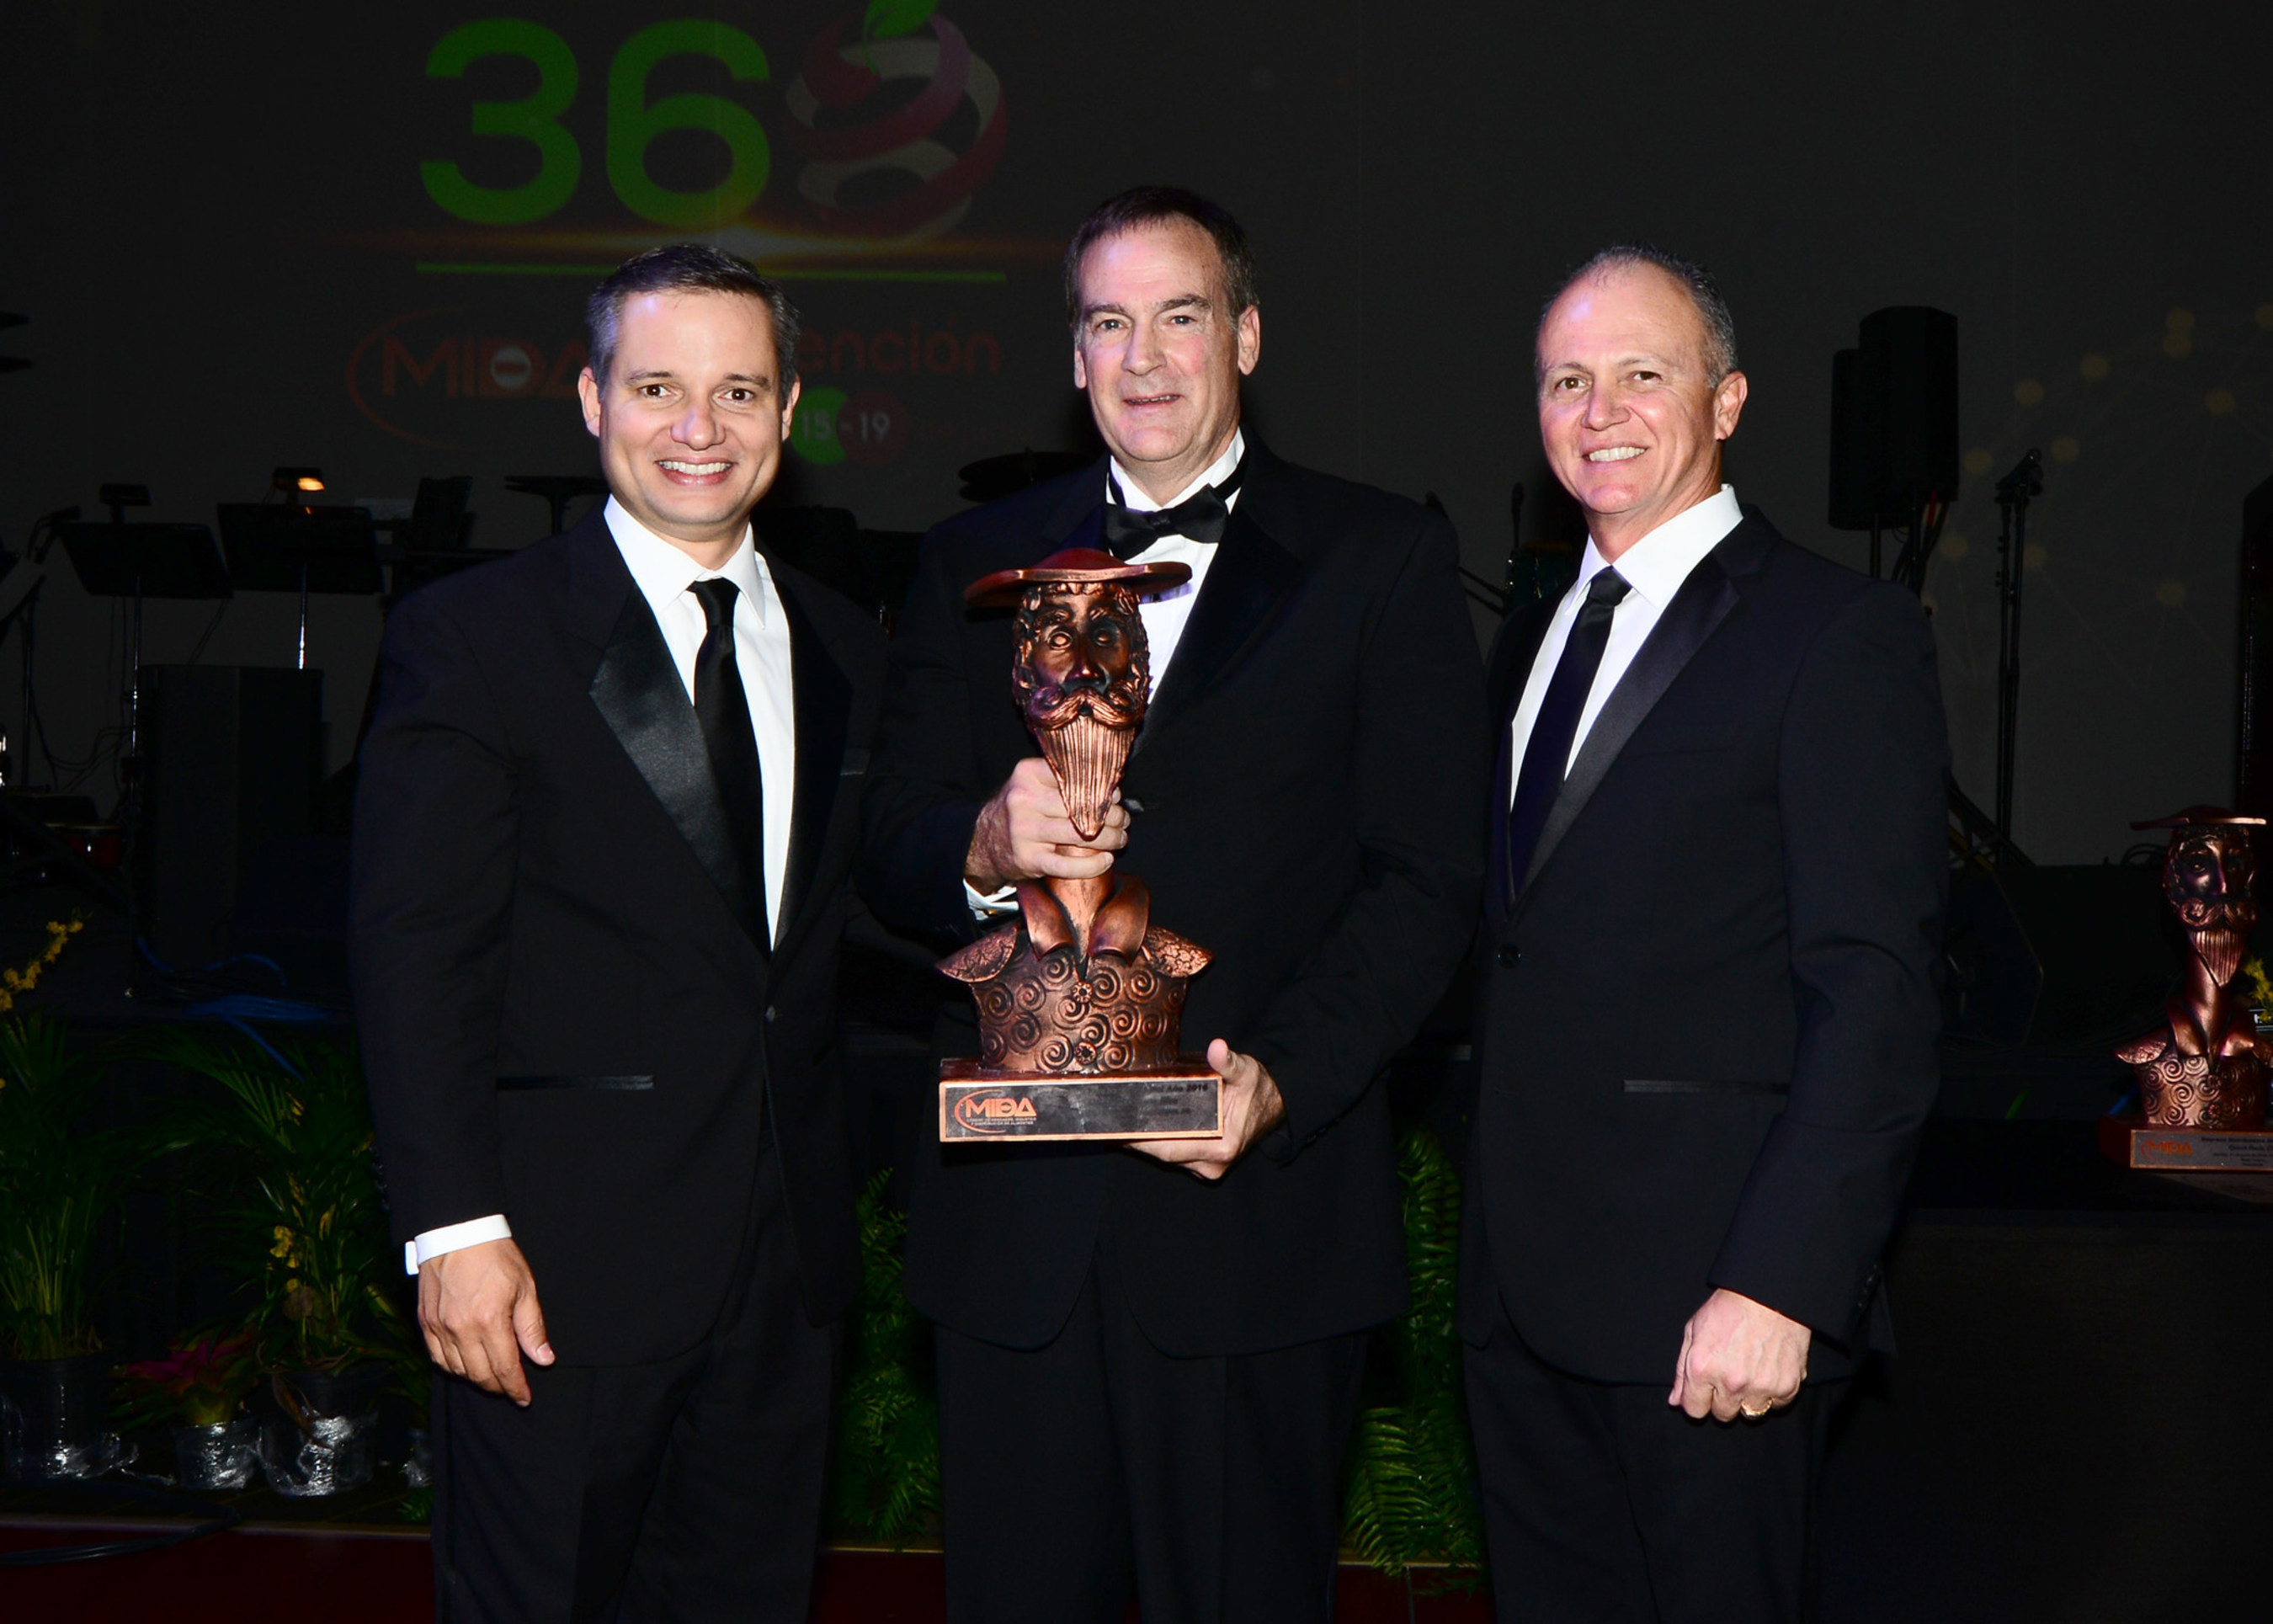 Jon Stuewe, president of Ardent Mills' Molinos de Puerto Rico accepts the award for 2016 Manufacturing Company of the Year from (left) Manuel Reyes Alfonso - Executive Vice President of the Chamber of Food Marketing, Industry and Distribution. (MIDA by its acronym) and (right) Ricky Castro - President of MIDA.